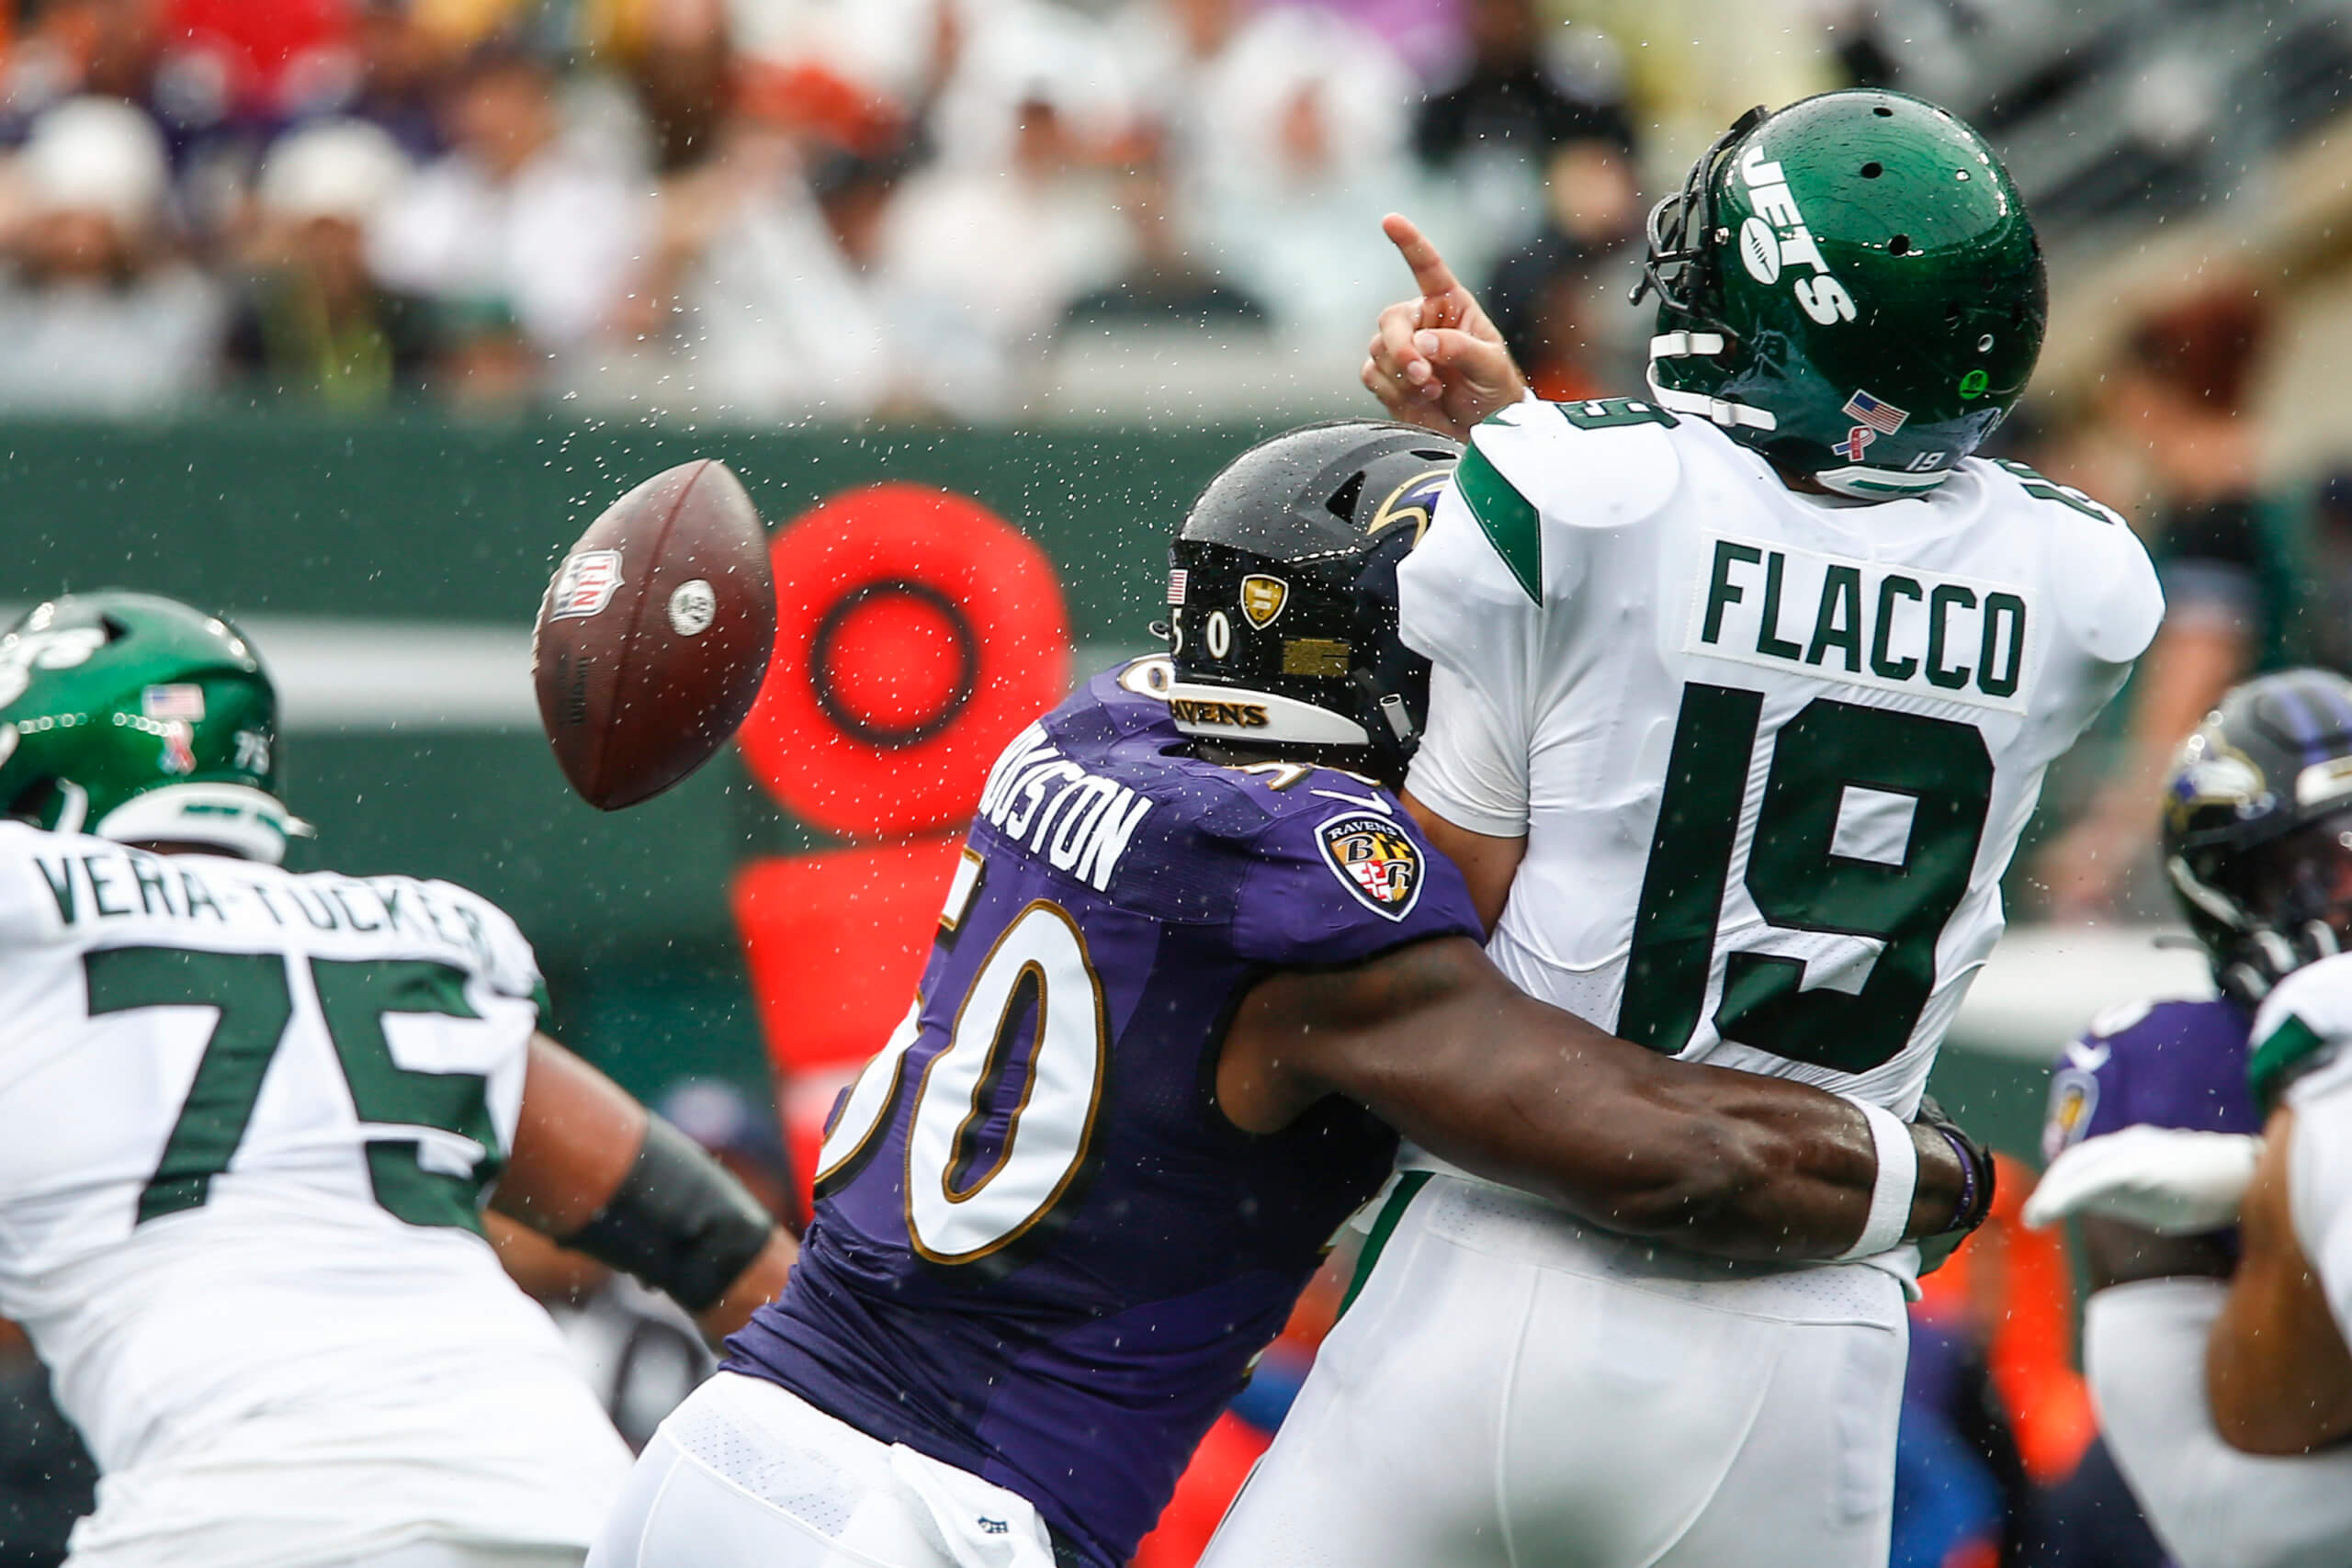 Jets fall to Ravens 24-9 in disappointing season opener